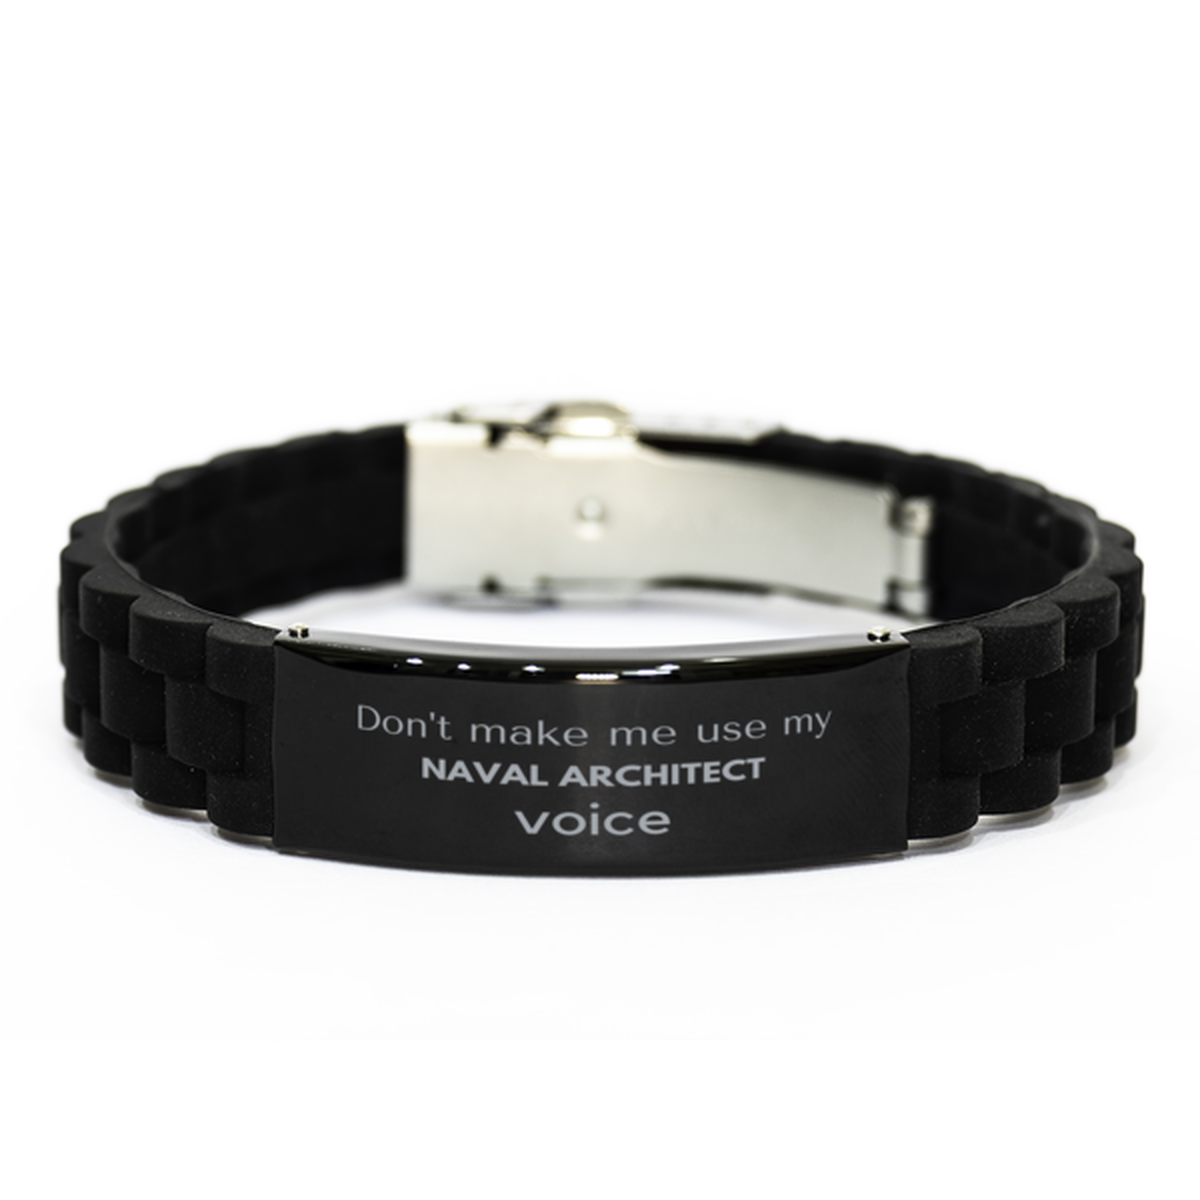 Don't make me use my Naval Architect voice, Sarcasm Naval Architect Gifts, Christmas Naval Architect Black Glidelock Clasp Bracelet Birthday Unique Gifts For Naval Architect Coworkers, Men, Women, Colleague, Friends